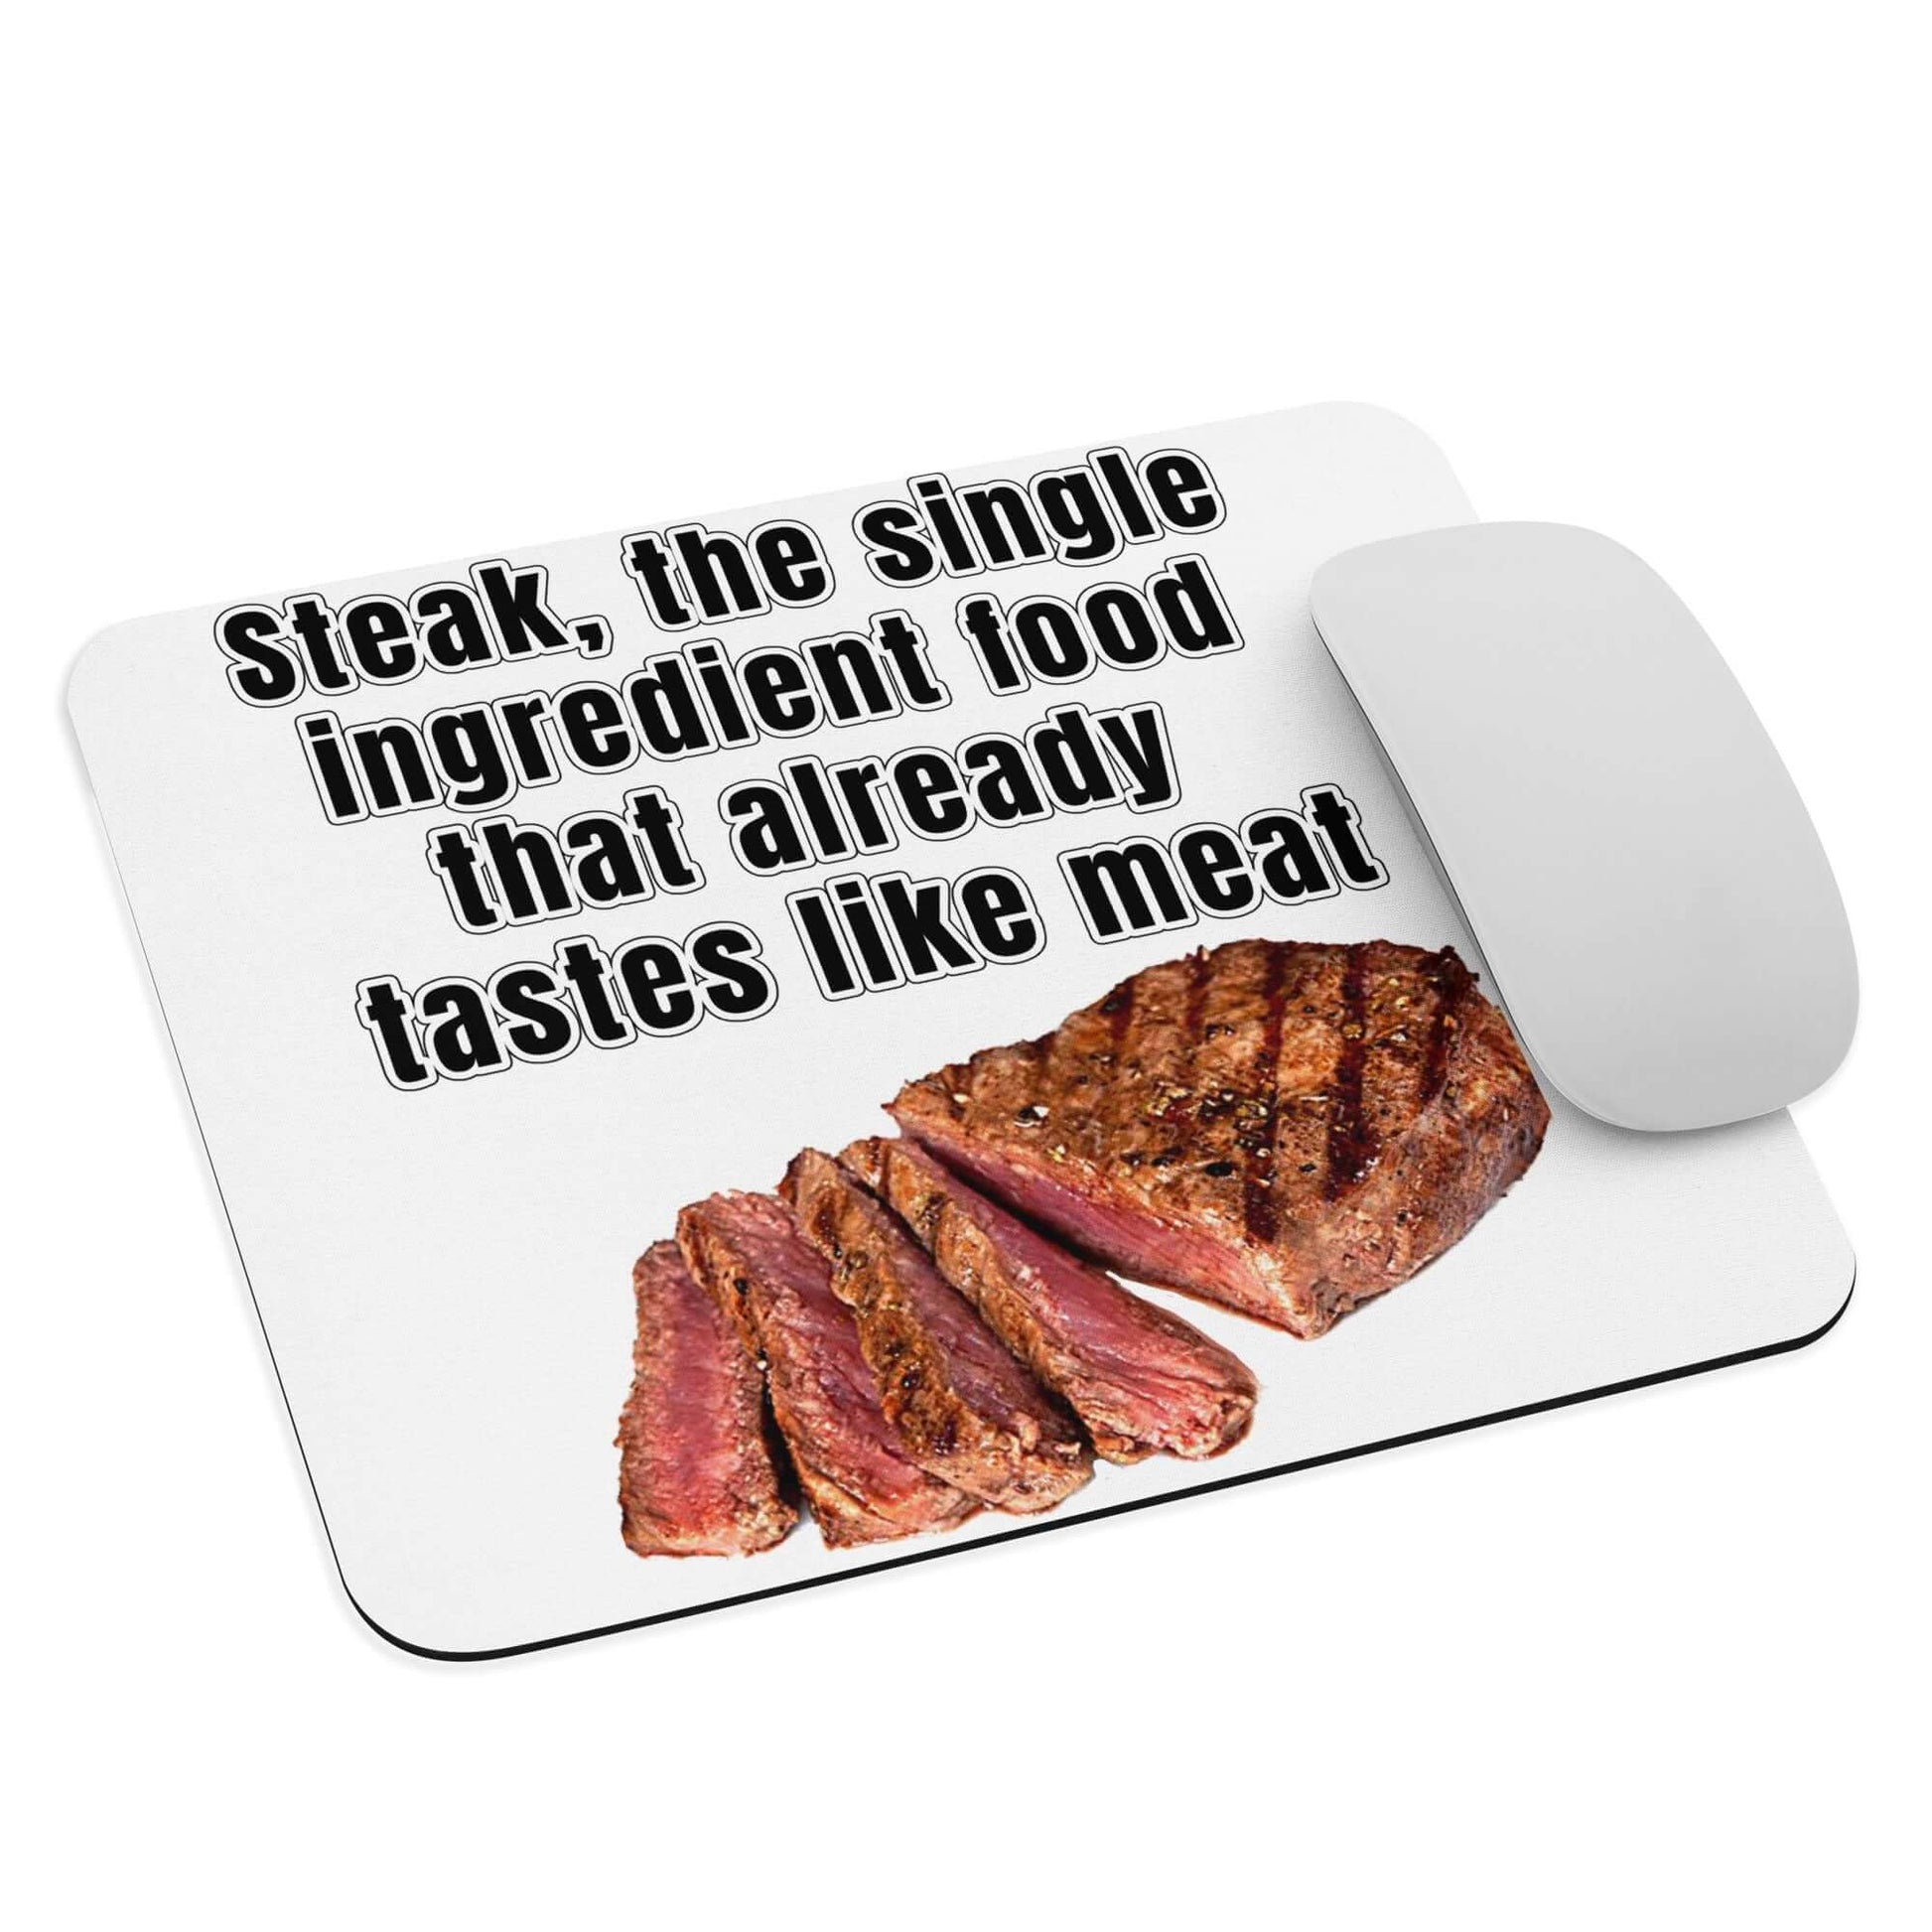 Steak, the single ingredient food that already tastes like meat - Mouse pad - Horrible Designs